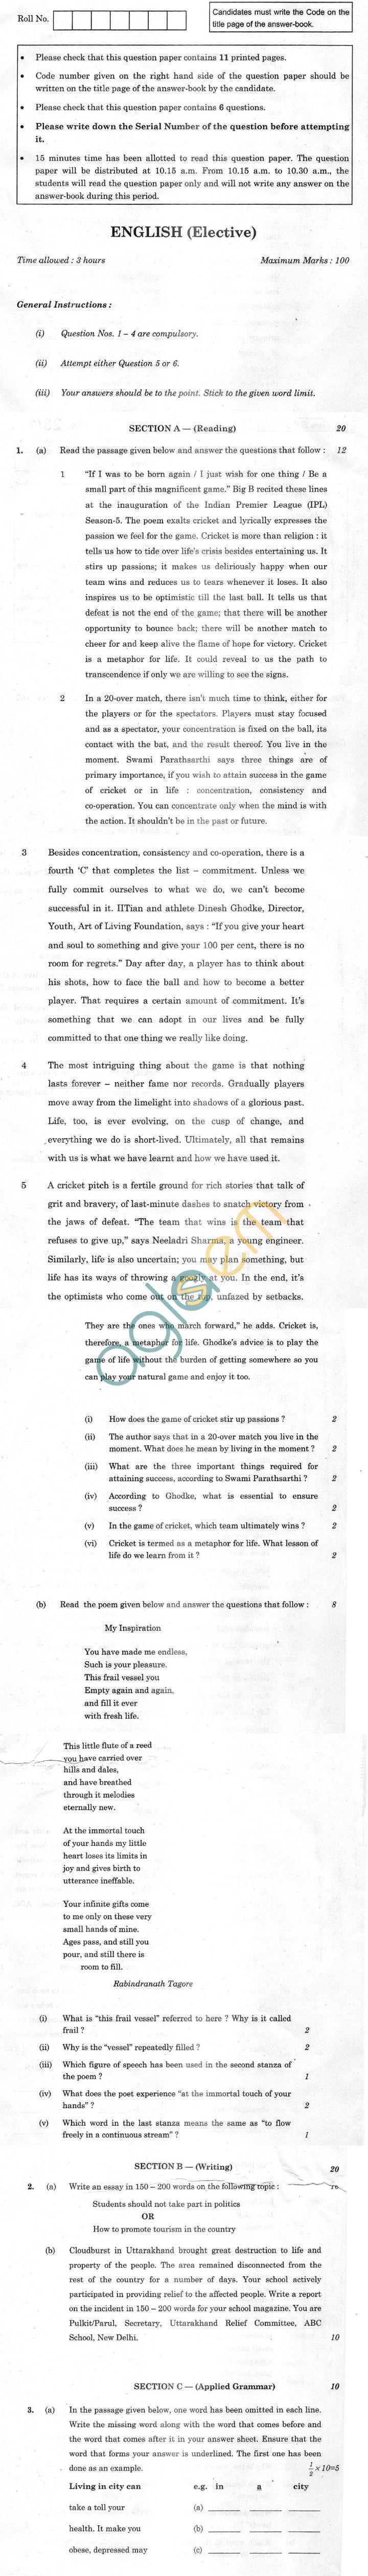 CBSE Compartment Exam 2013 Class XII Question Paper - English (Elective)